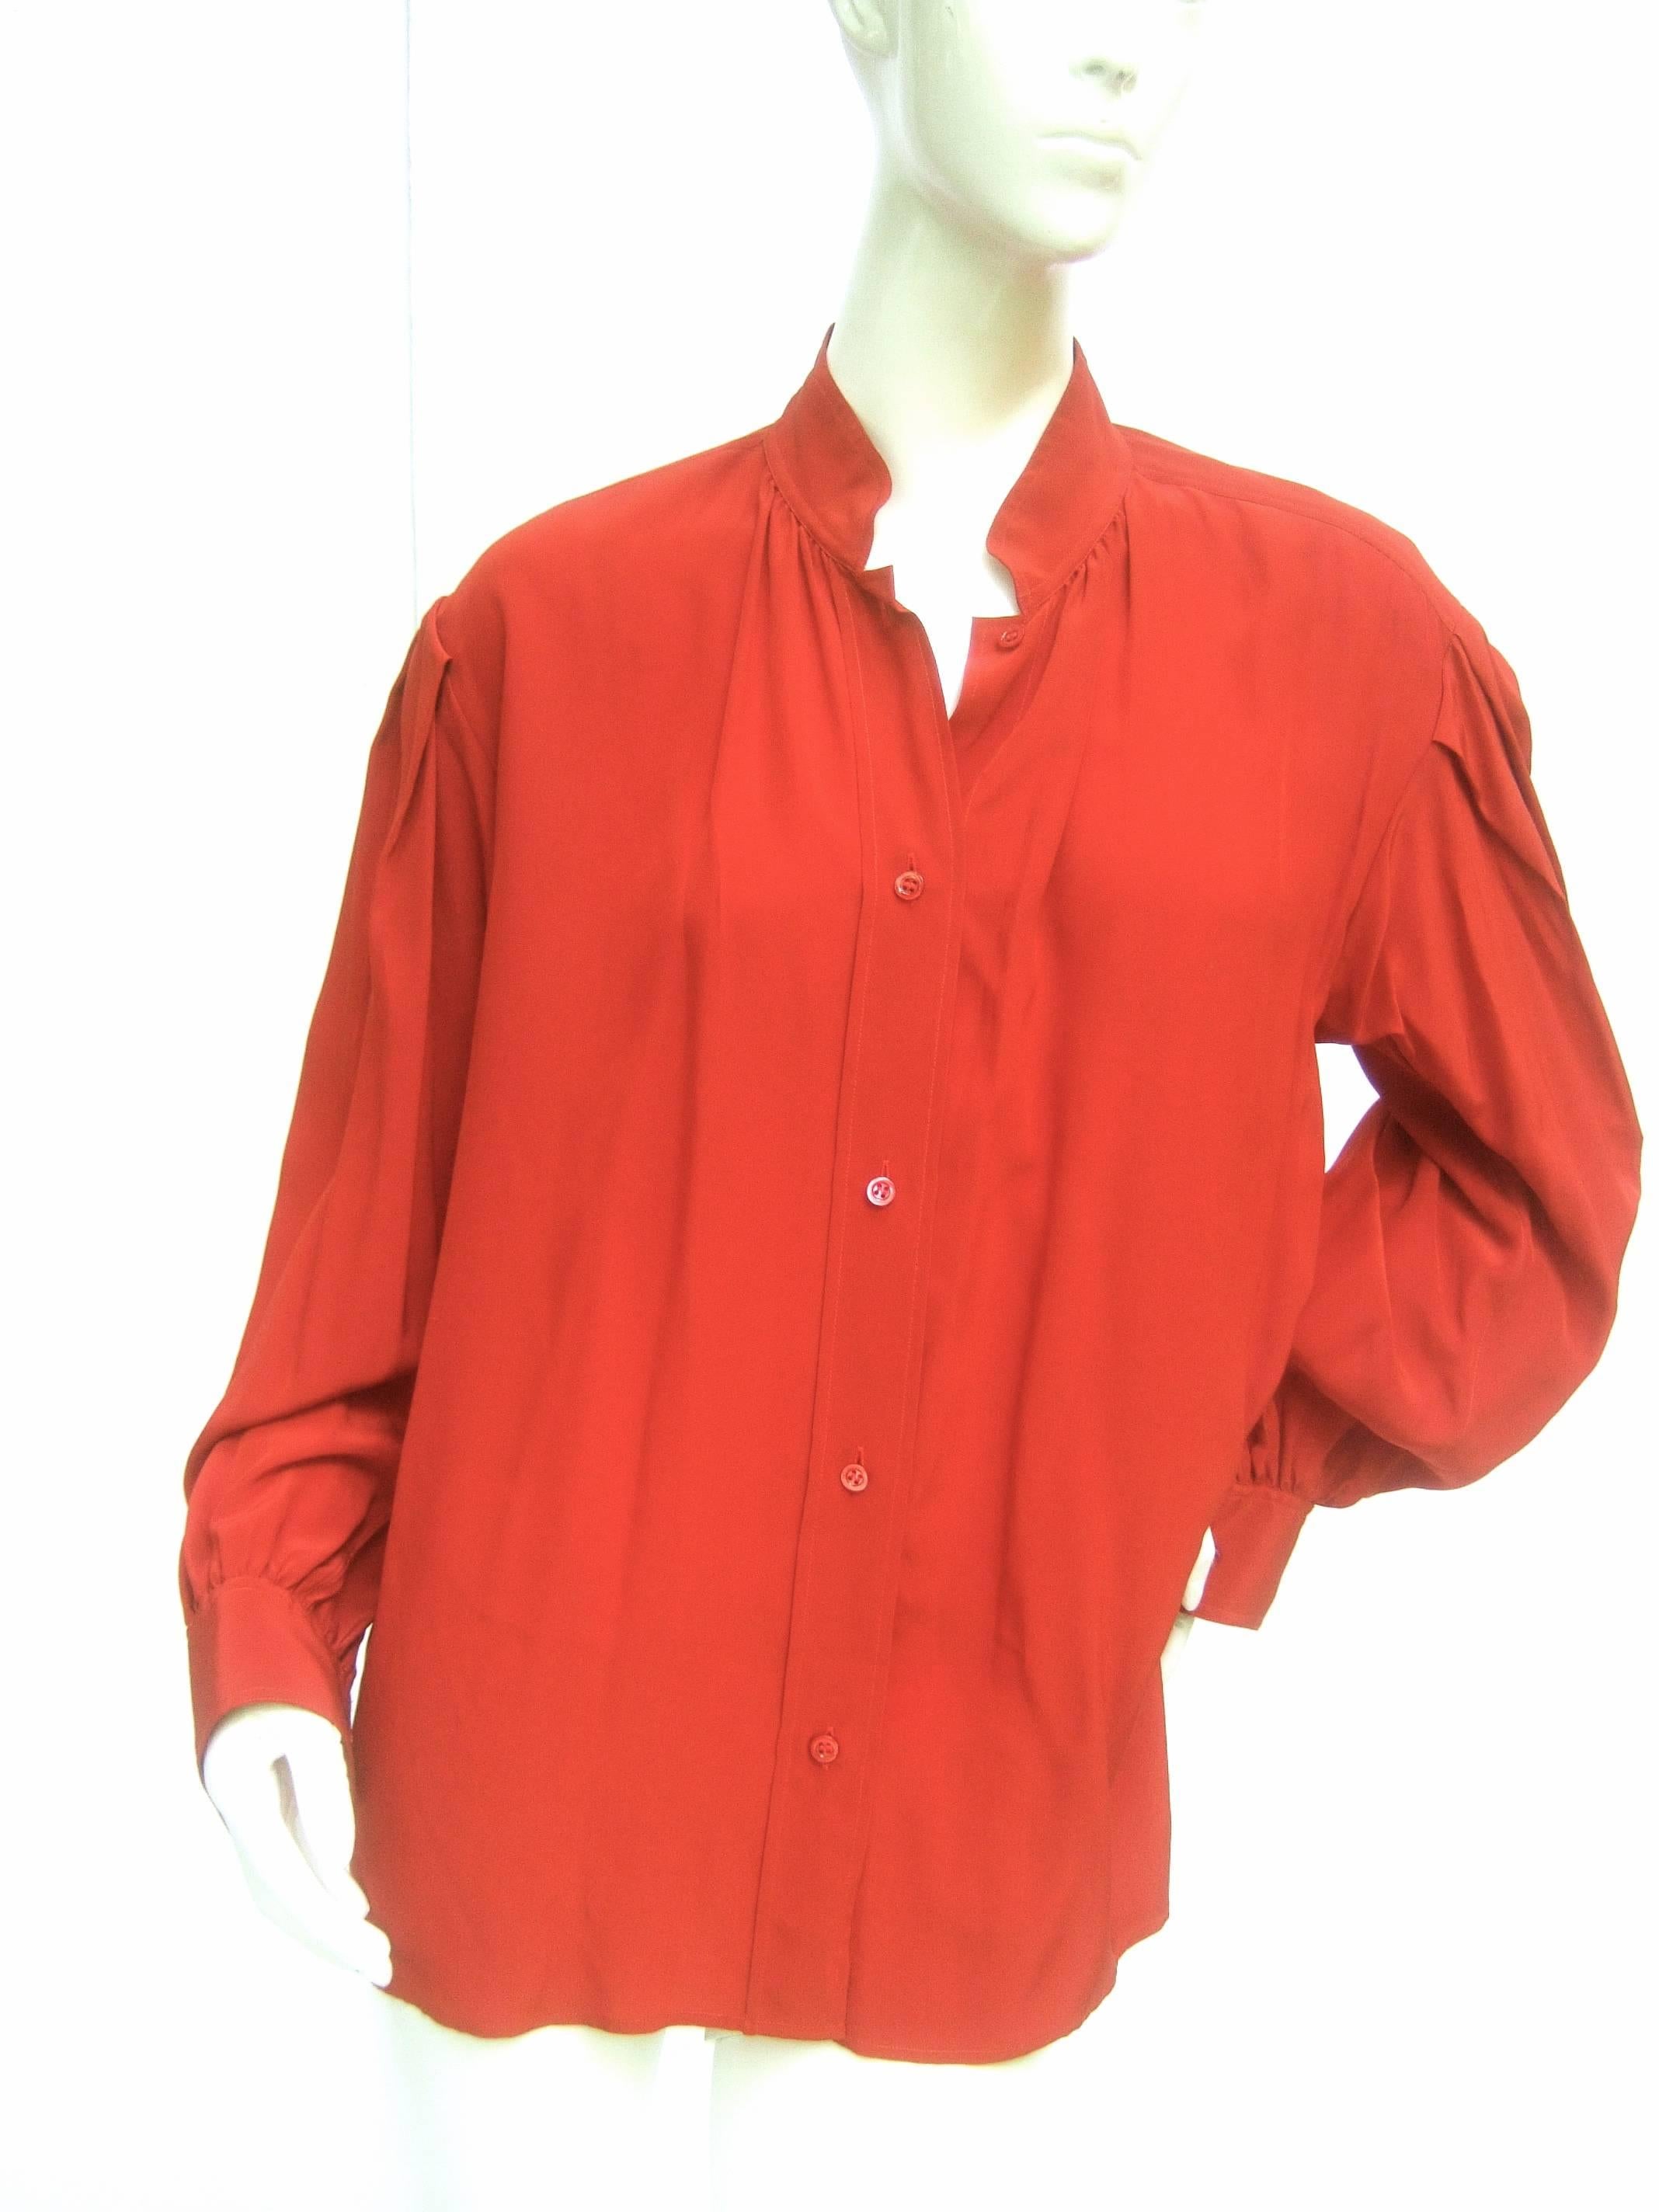 Saint Laurent Rive Gauche Crimson red silk blouse c 1970s
The elegant silk blouse is designed with reddish cooper
brown color

The luxurious silk drapes loose with subtle pleats at the 
neckline, shoulders and cuffs. The Nehru style  stand up